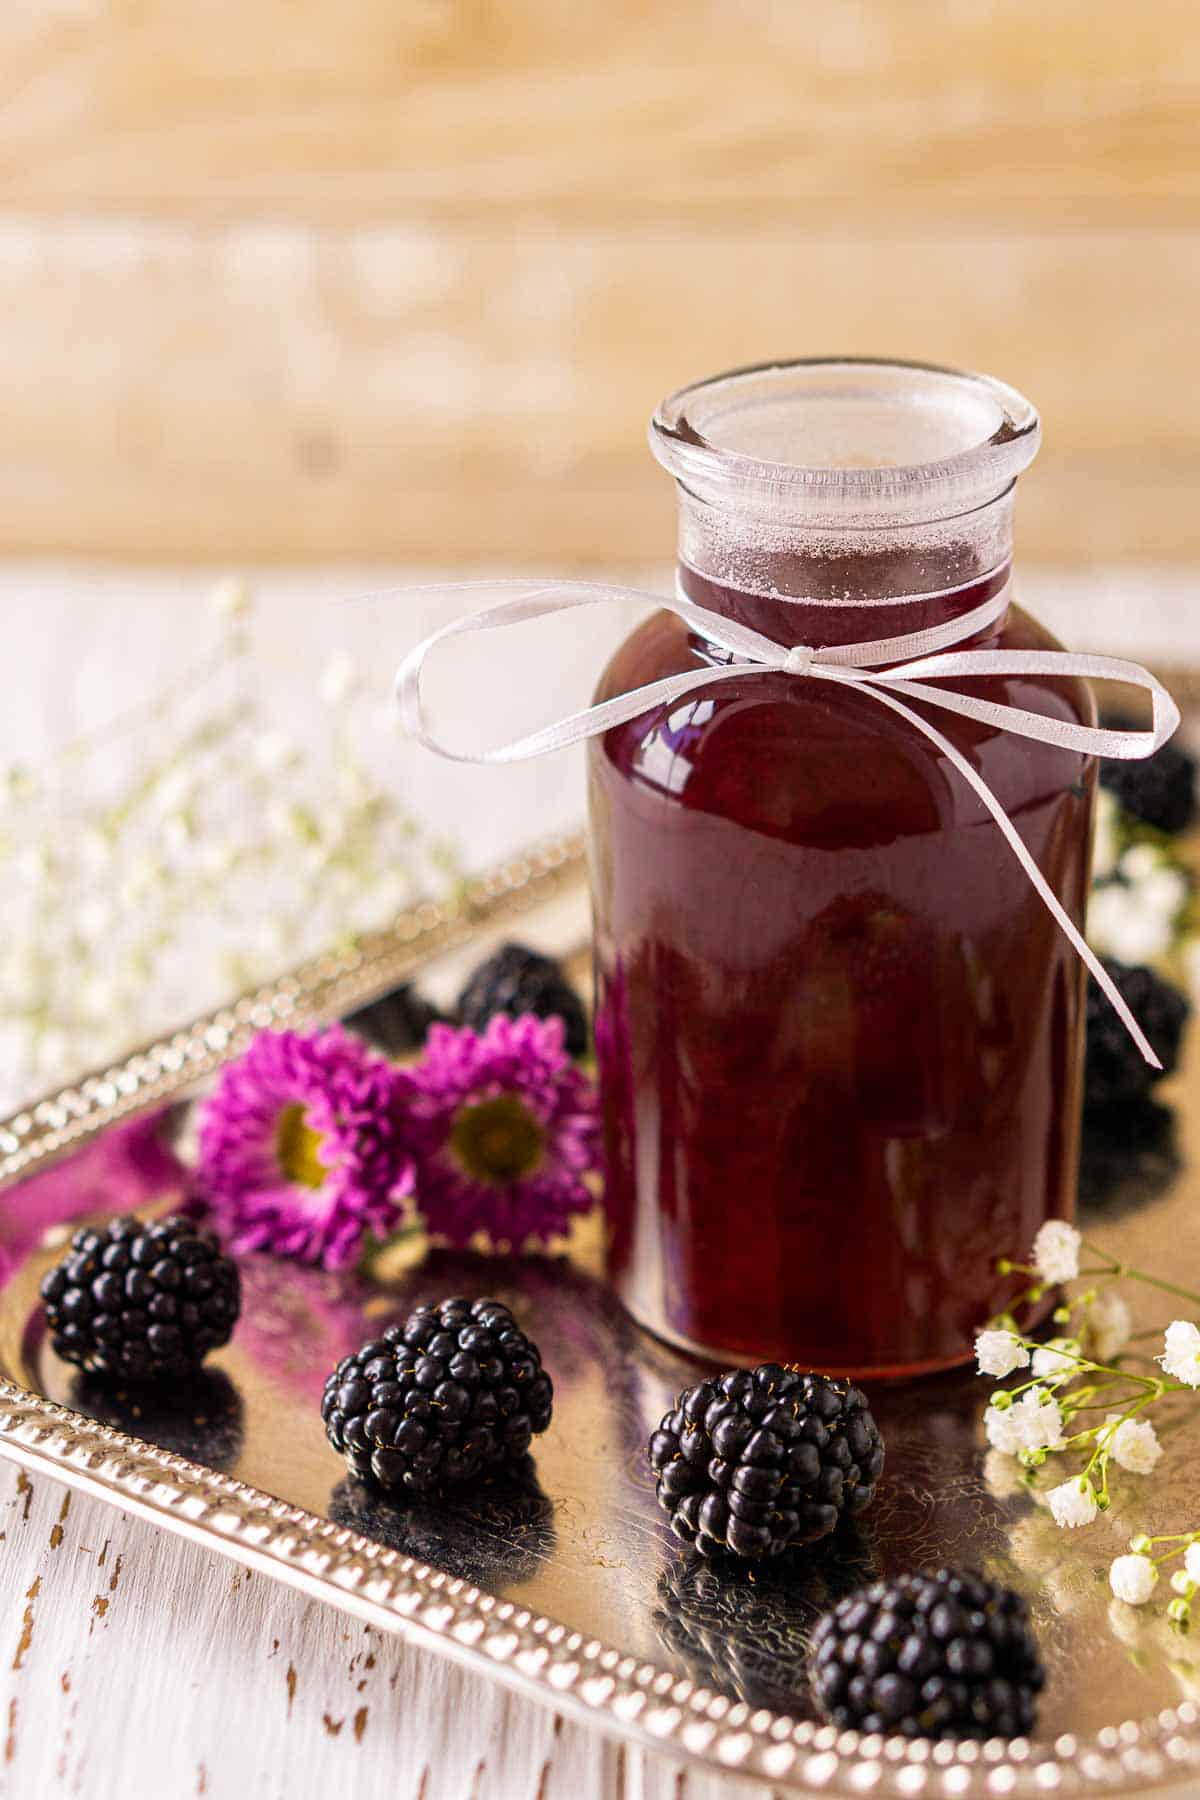 A bottle of the blackberry simple syrup on a silver tray with berries and white flowers against a cream-colored background.